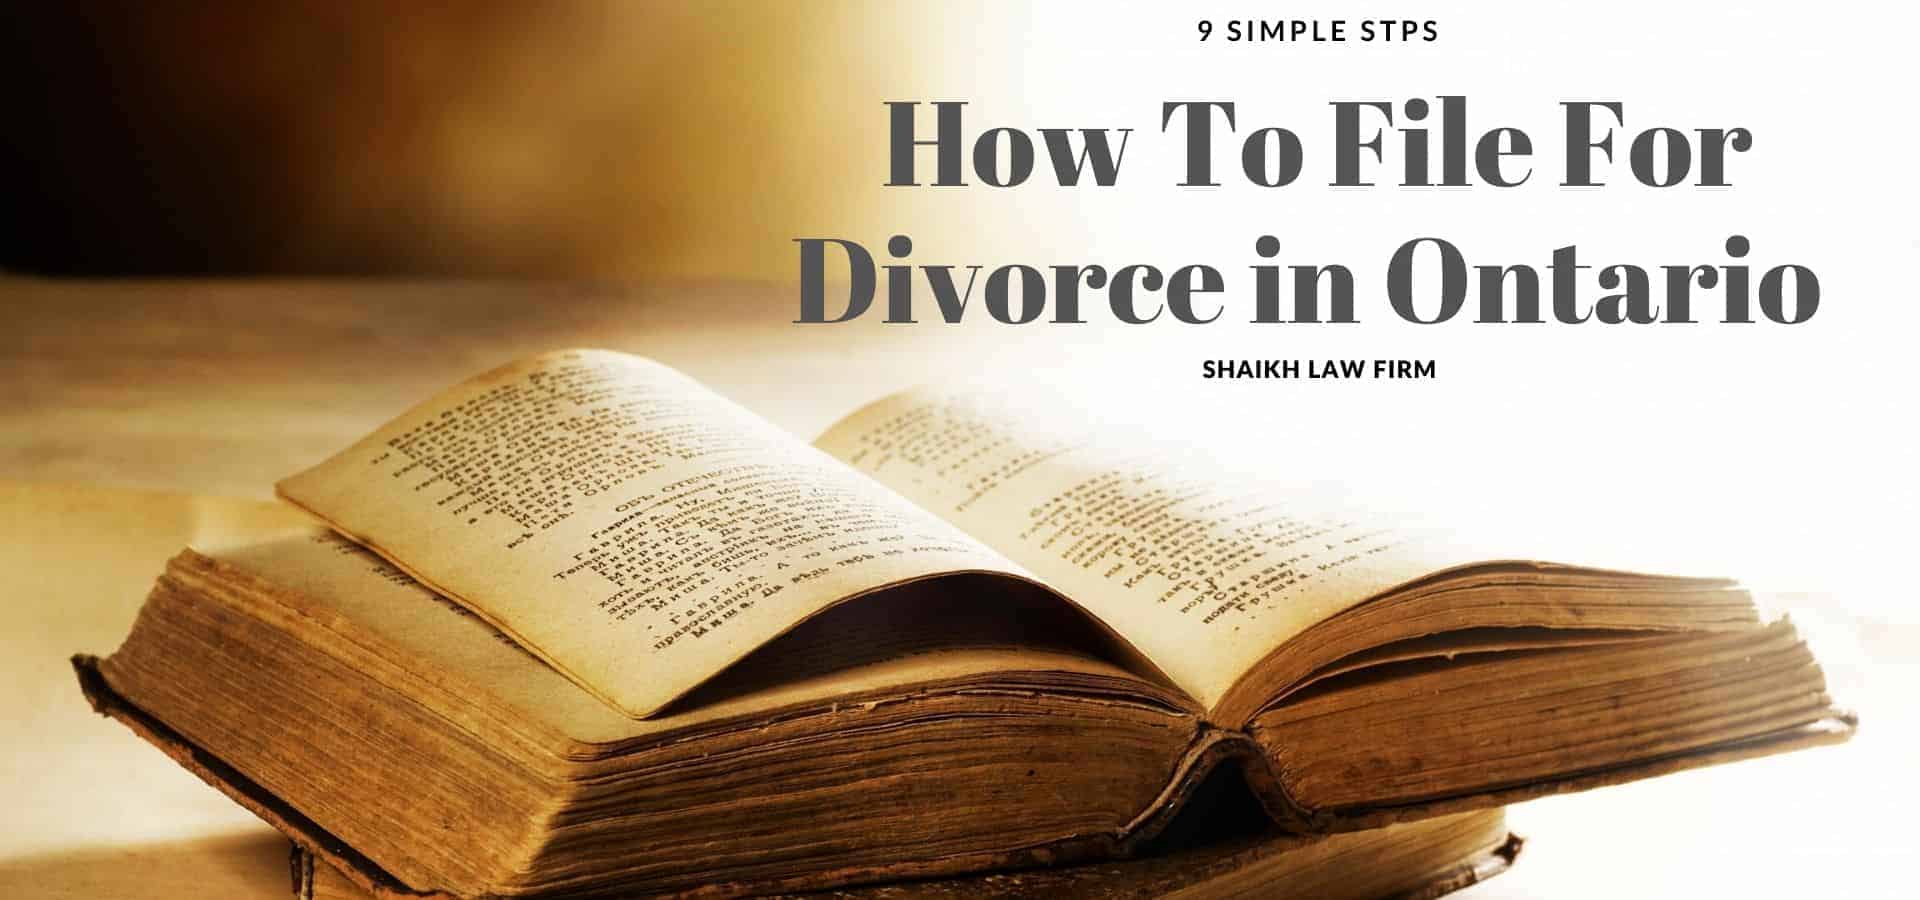 How To File For Divorce in Ontario